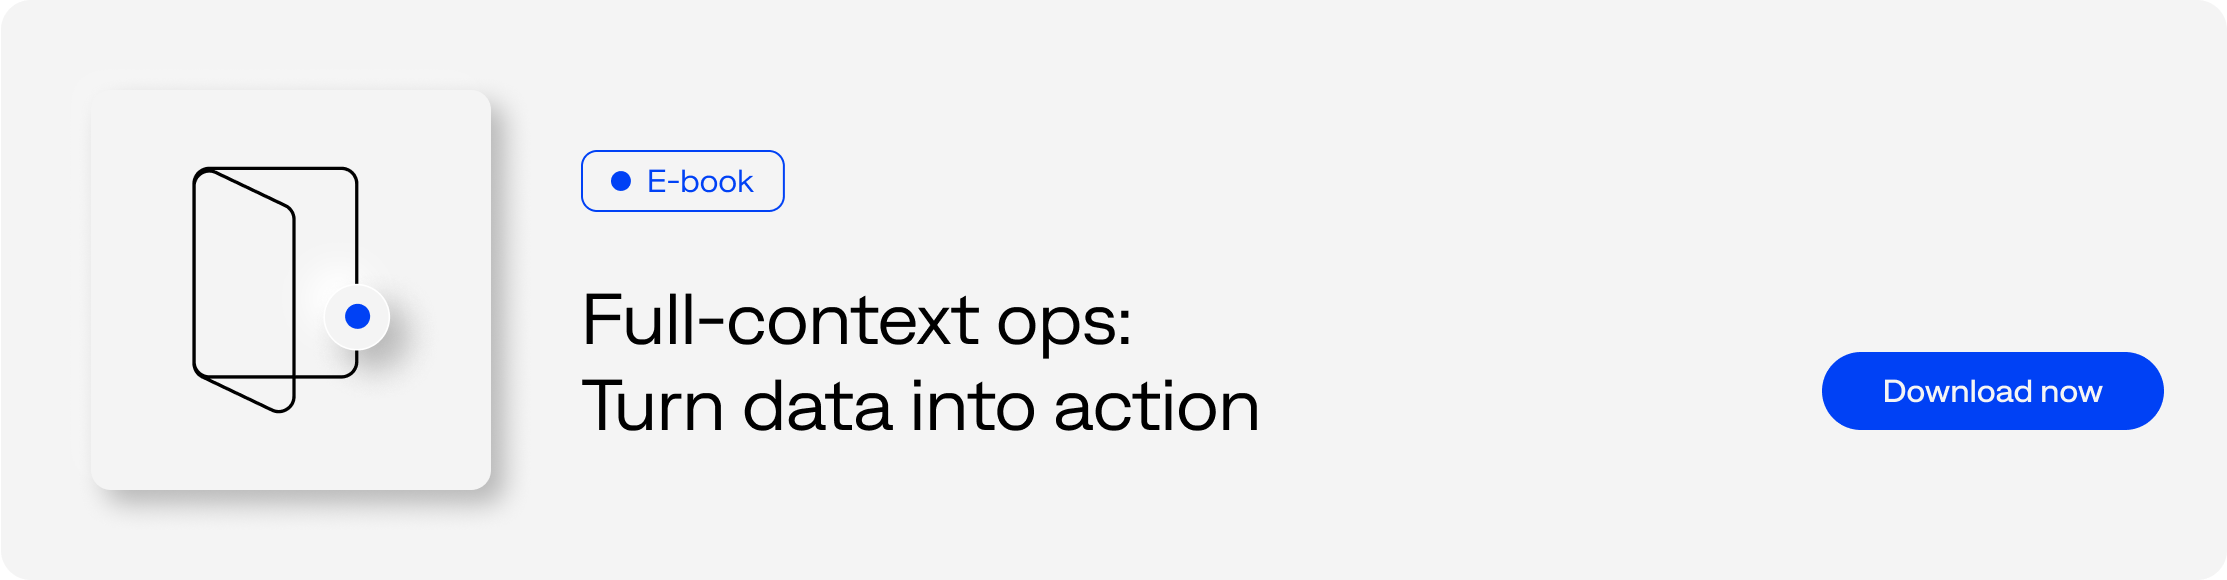 Full-context ops: Turn data into action: Download now